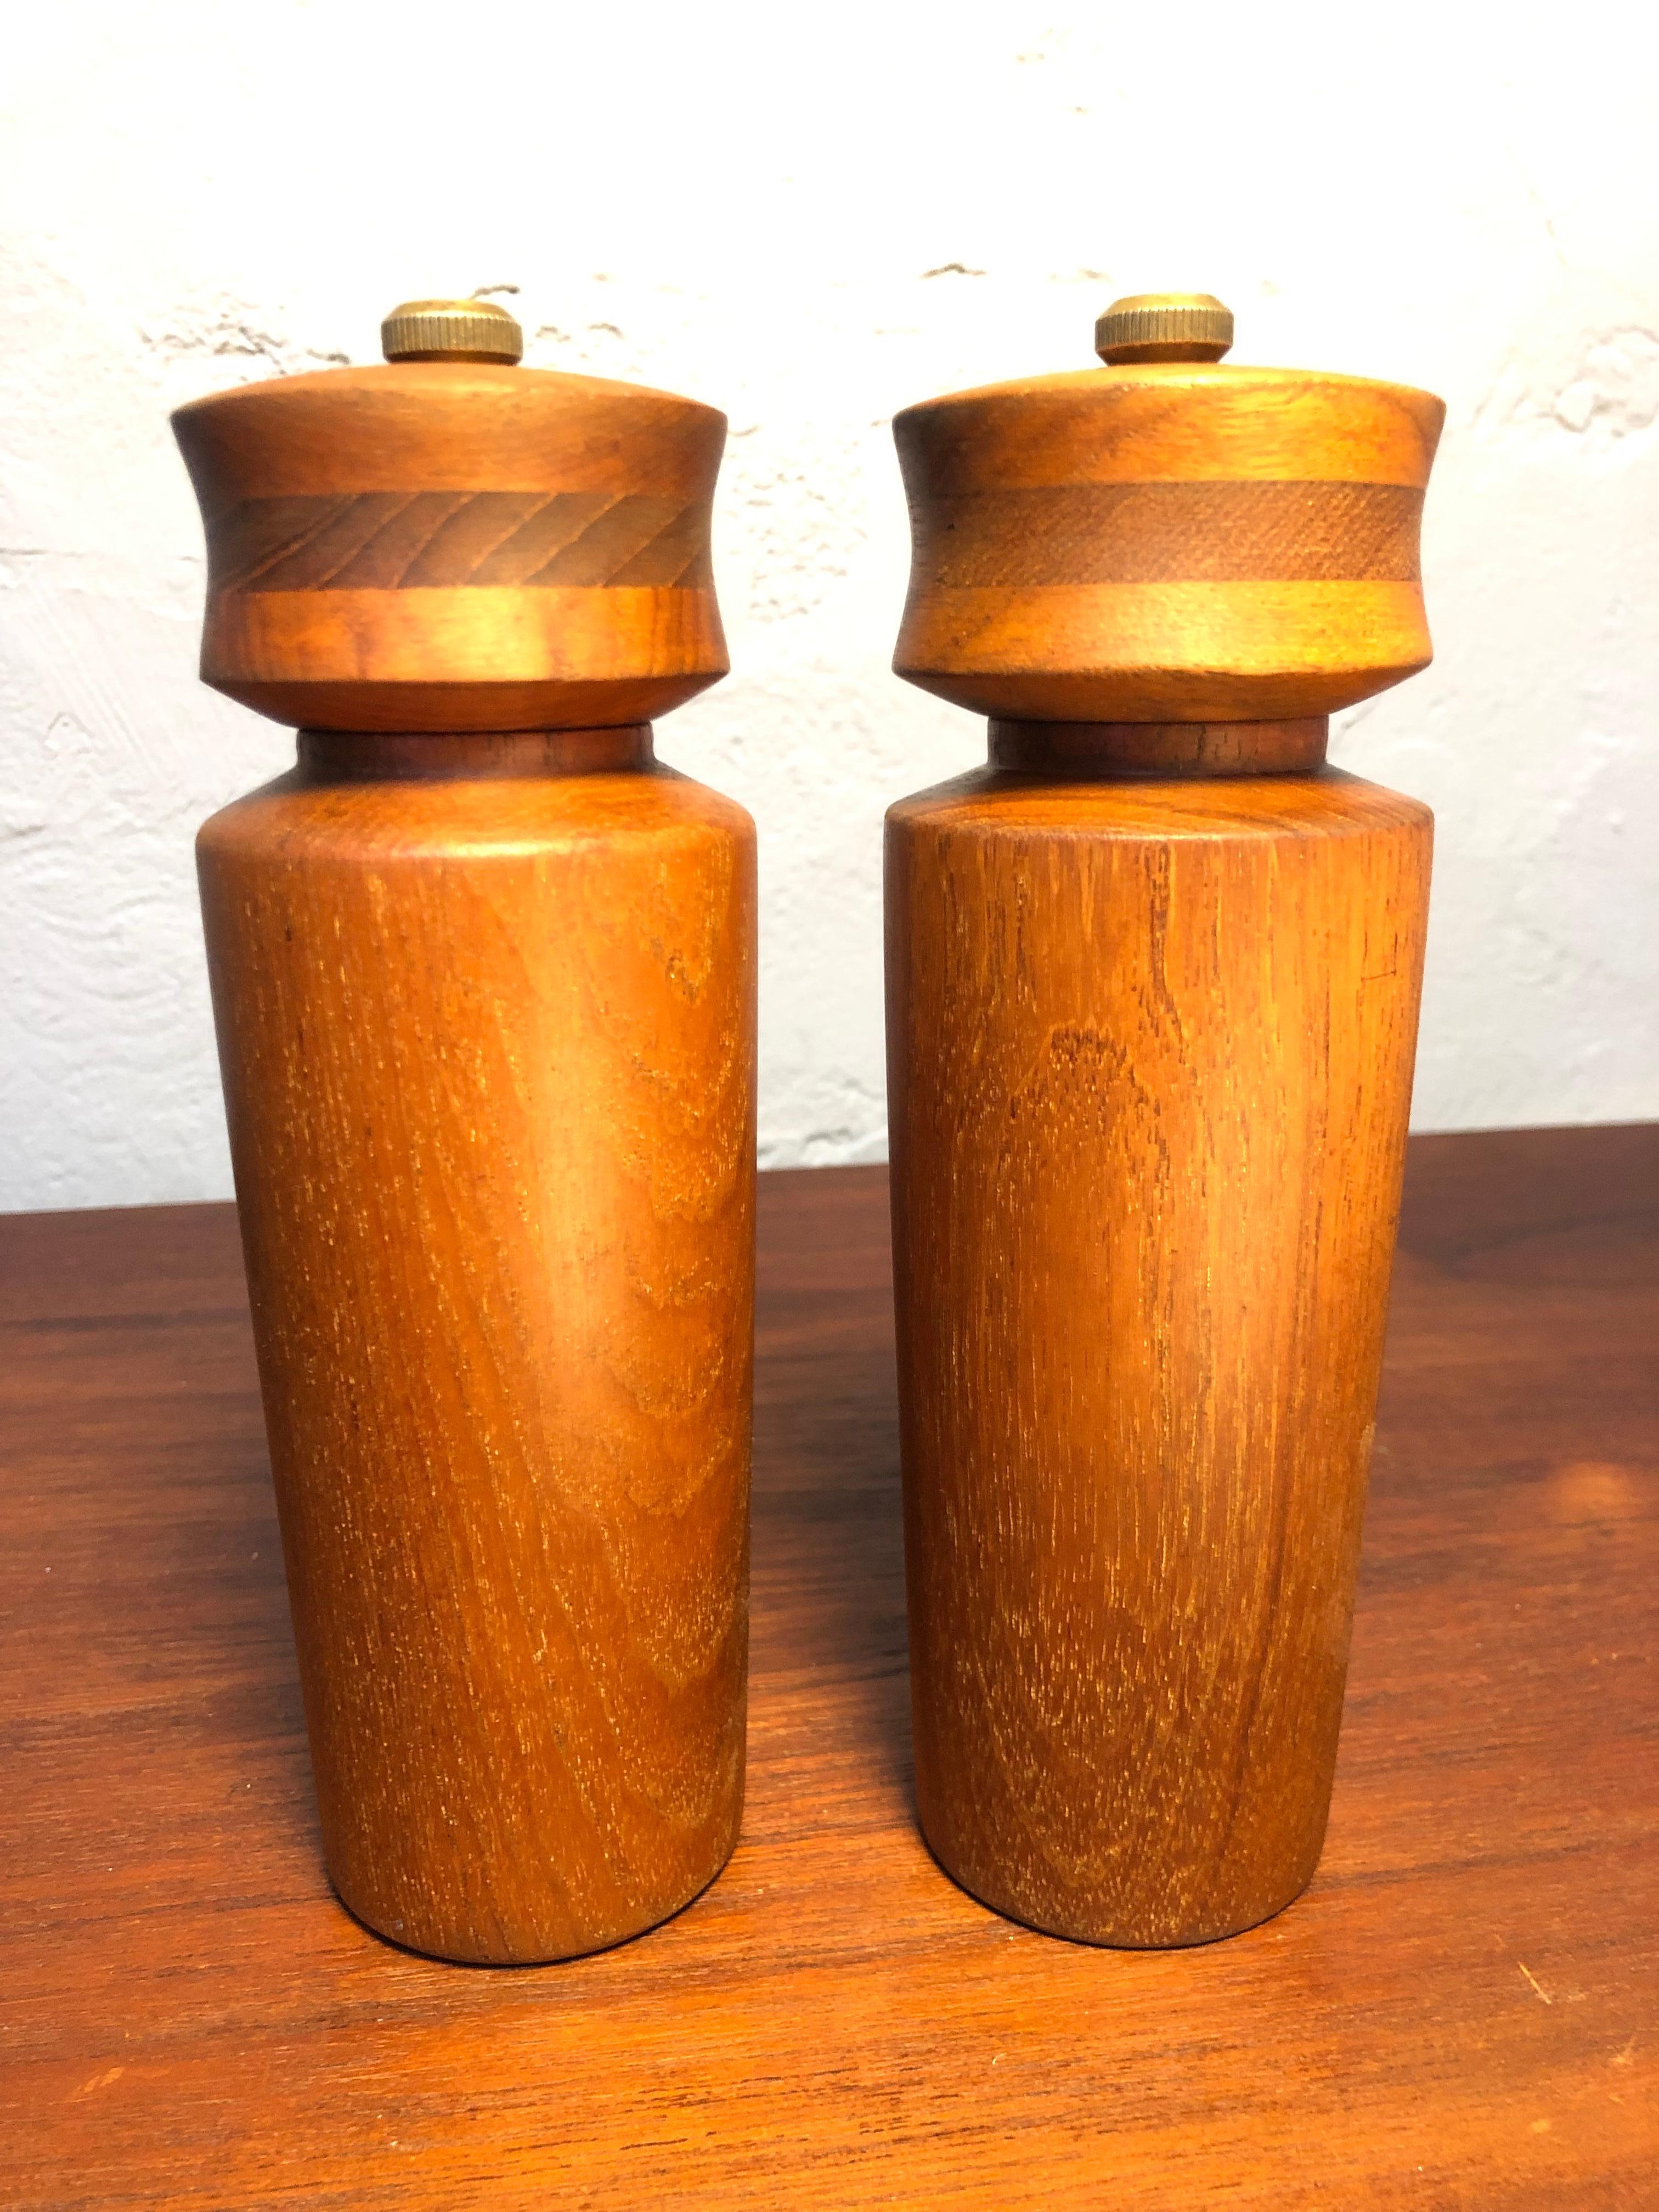 Vintage salt and pepper mills by Dane Wood of Denmark in lovely midcentury design and Classic Scandinavian quality.
Turned teak. 
These mills have been dismantled clean sanded and waxed. 

 